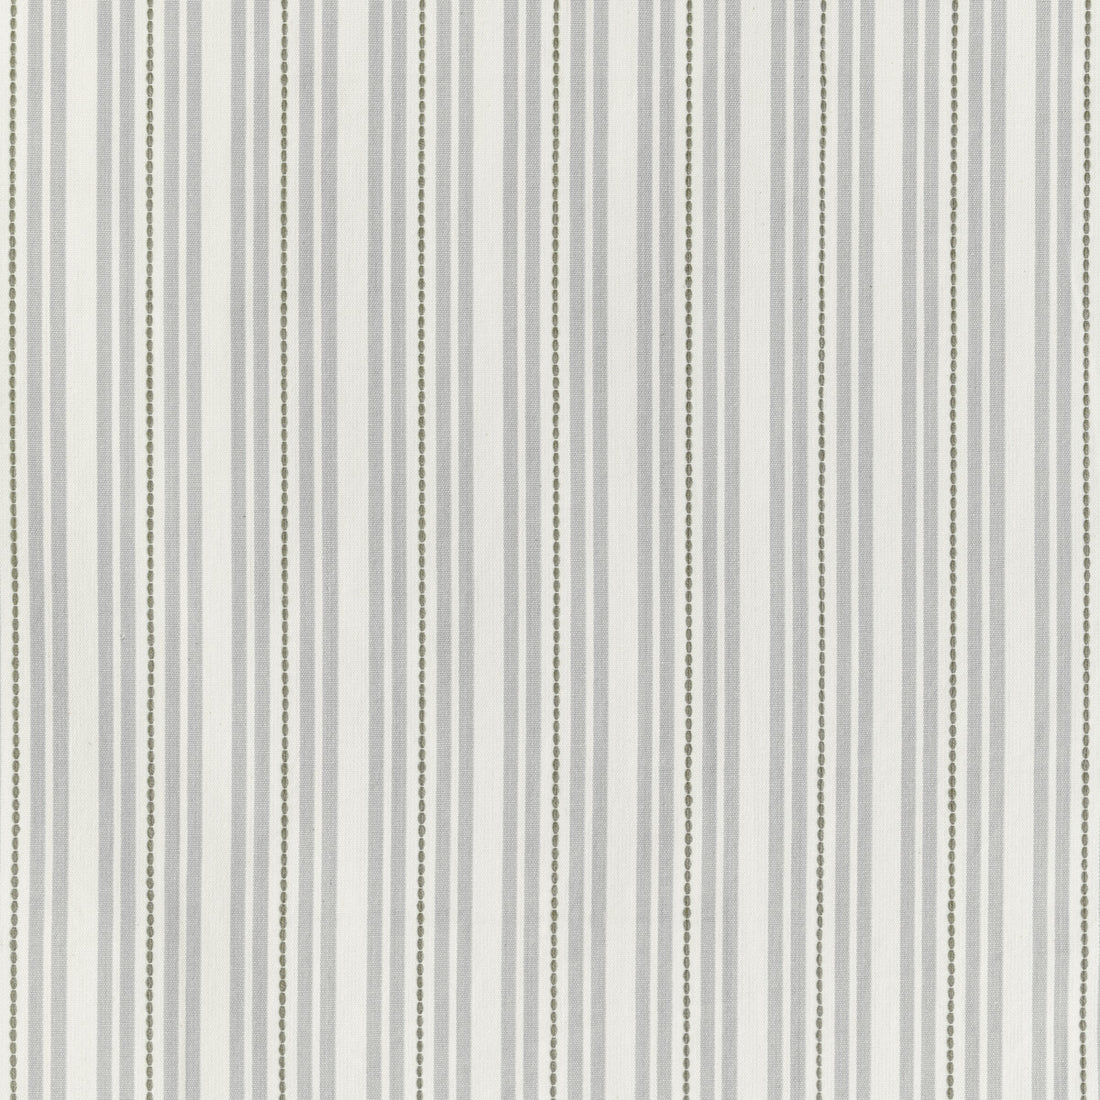 Basics fabric in 36046-11 color - pattern 36046.11.0 - by Kravet Basics in the L&